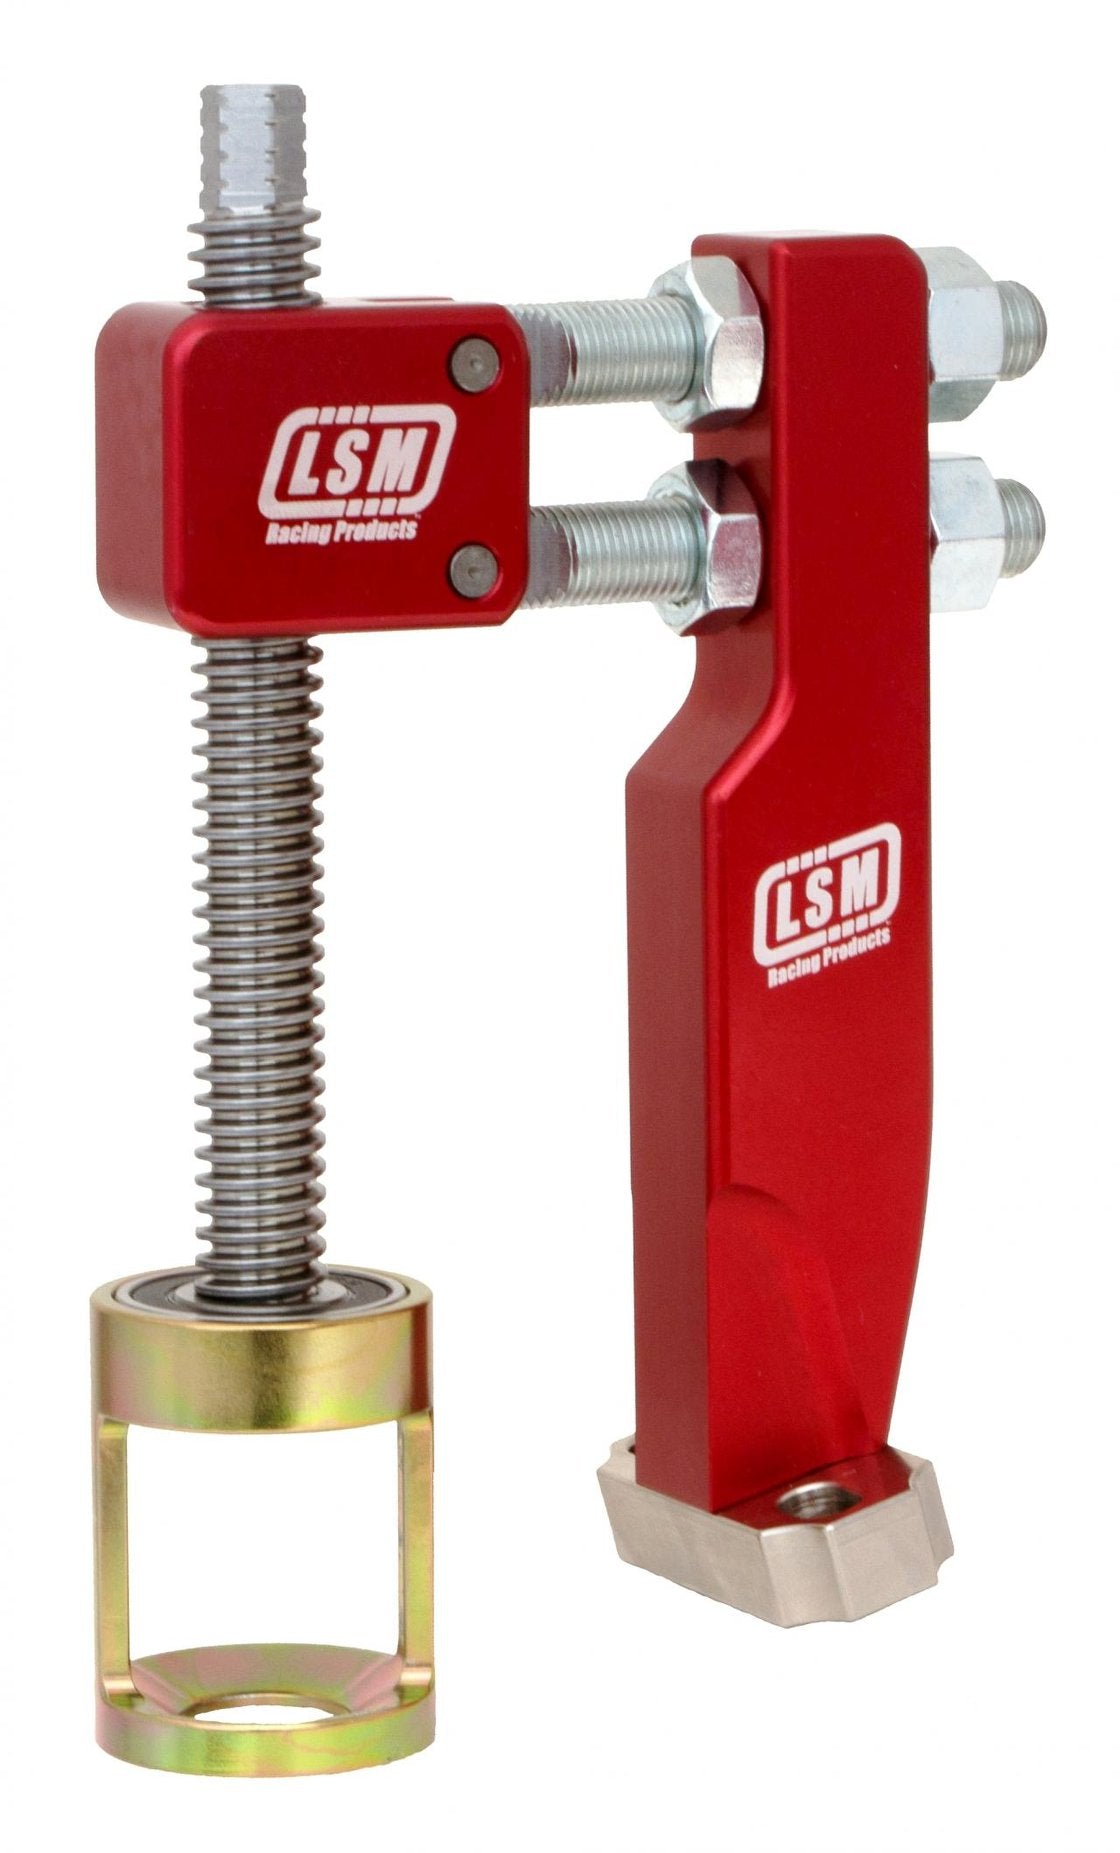 LSM Spring Compressor for Canted or Splayed style with Shaft Mount Rockers